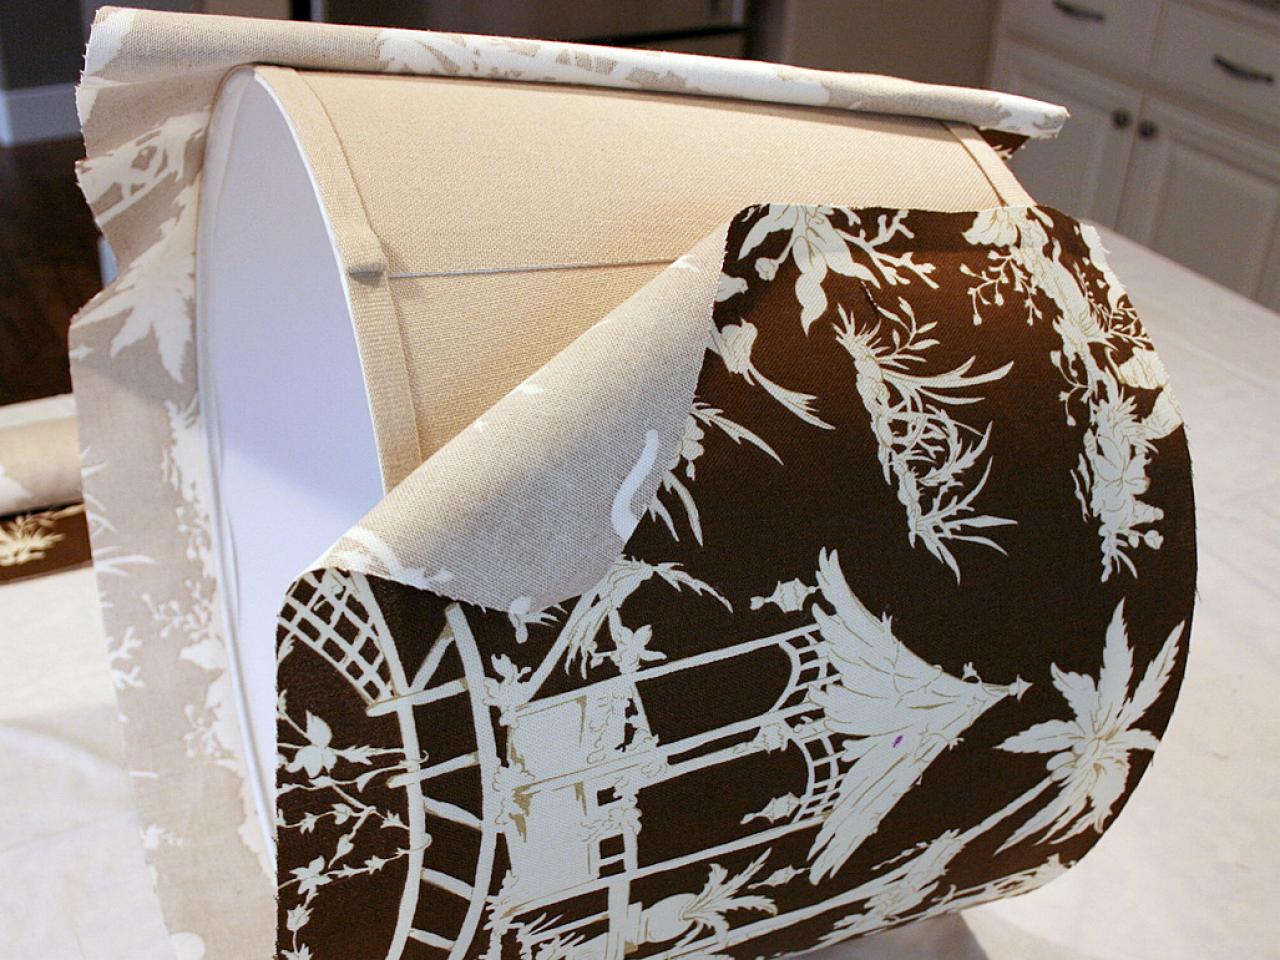 Custom Fabric Covered Lampshade, How To Cover A Wire Lampshade Frame With Fabric